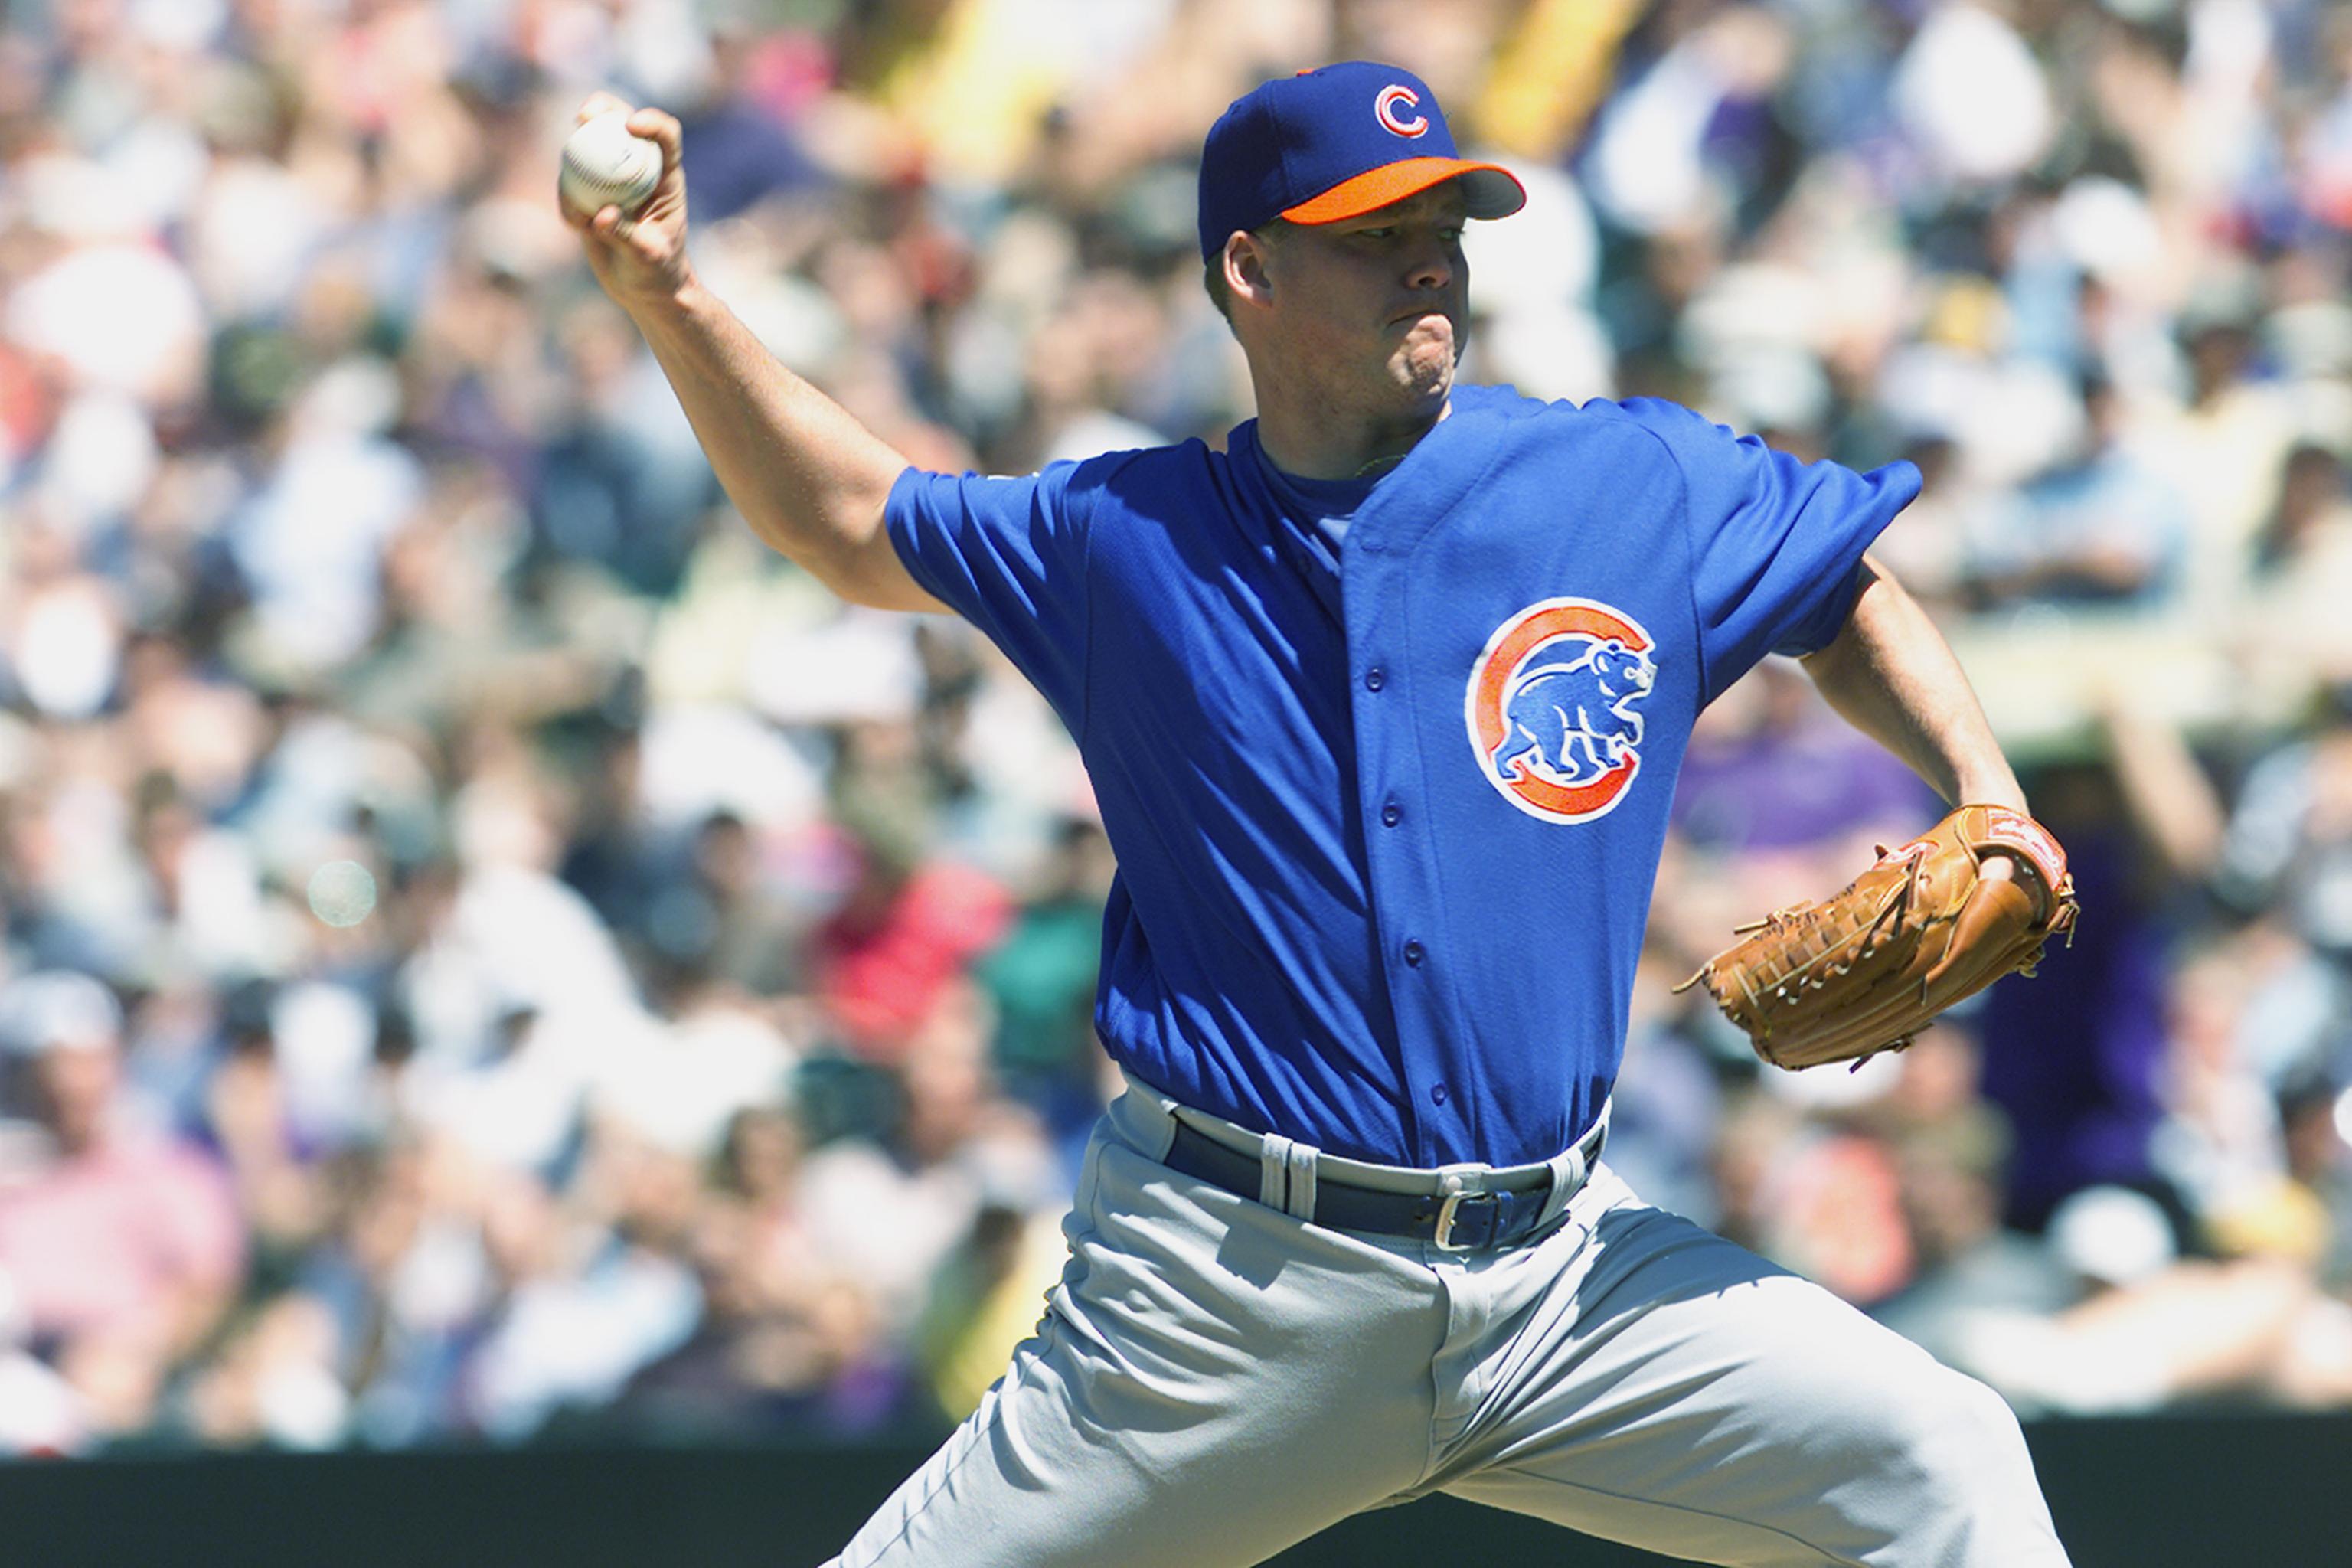 Chicago Cubs Former Pitcher Jon Lieber Dishes on Why Team Hasn't